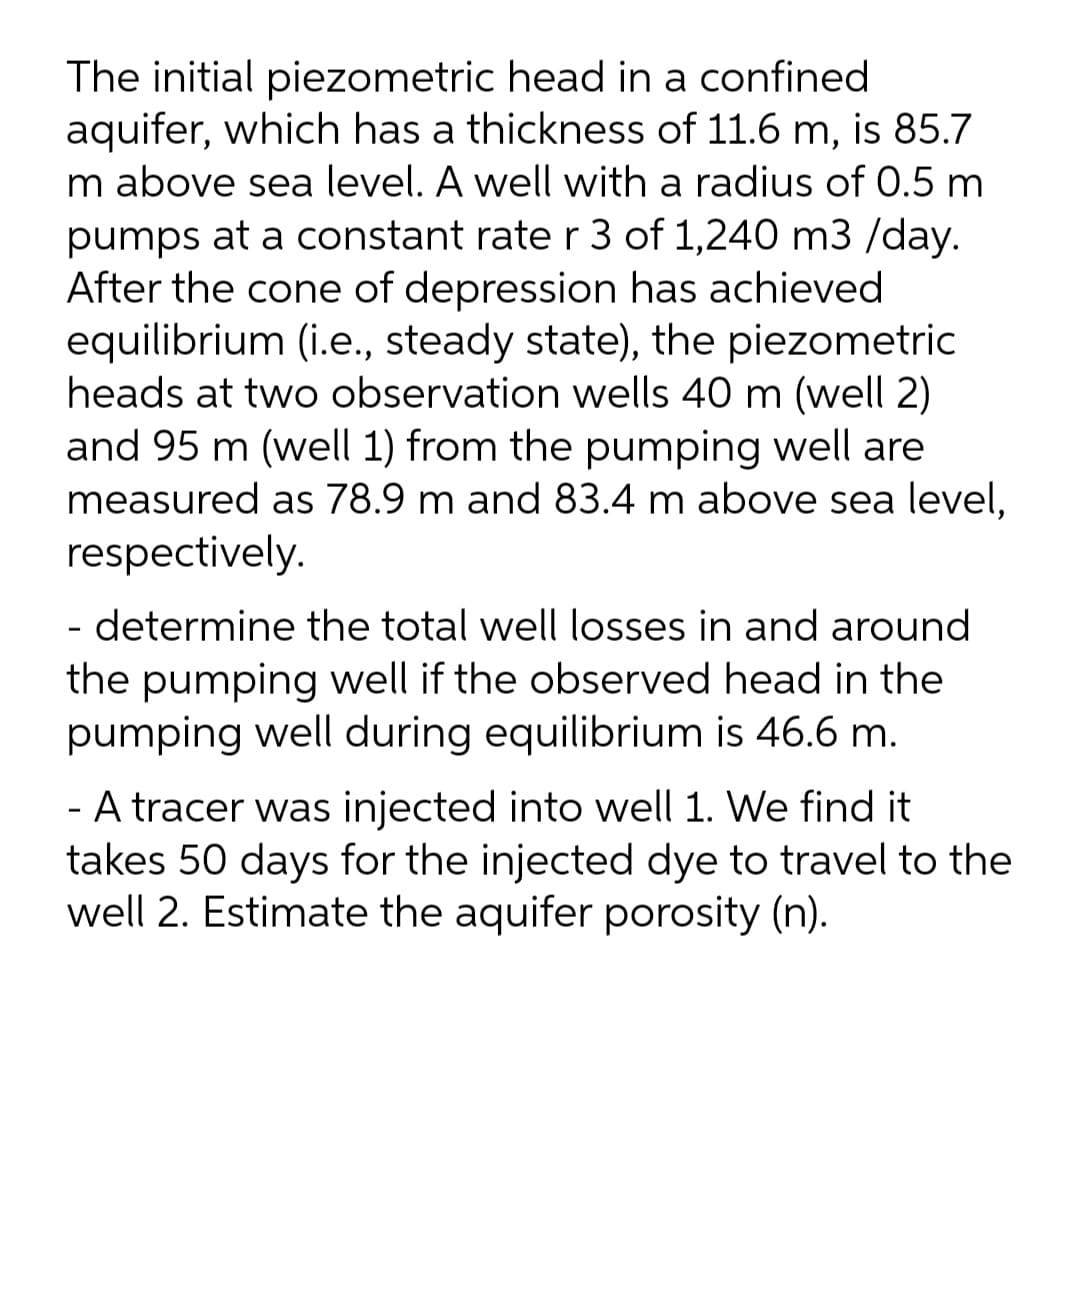 The initial piezometric head in a confined
aquifer, which has a thickness of 11.6 m, is 85.7
m above sea level. A well with a radius of 0.5 m
pumps at a constant rate r 3 of 1,240 m3 /day.
After the cone of depression has achieved
equilibrium (i.e., steady state), the piezometric
heads at two observation wells 40 m (well 2)
and 95 m (well 1) from the pumping well are
measured as 78.9 m and 83.4 m above sea level,
respectively.
- determine the total well losses in and around
the pumping well if the observed head in the
pumping well during equilibrium is 46.6 m.
A tracer was injected into well 1. We find it
takes 50 days for the injected dye to travel to the
well 2. Estimate the aquifer porosity (n).
